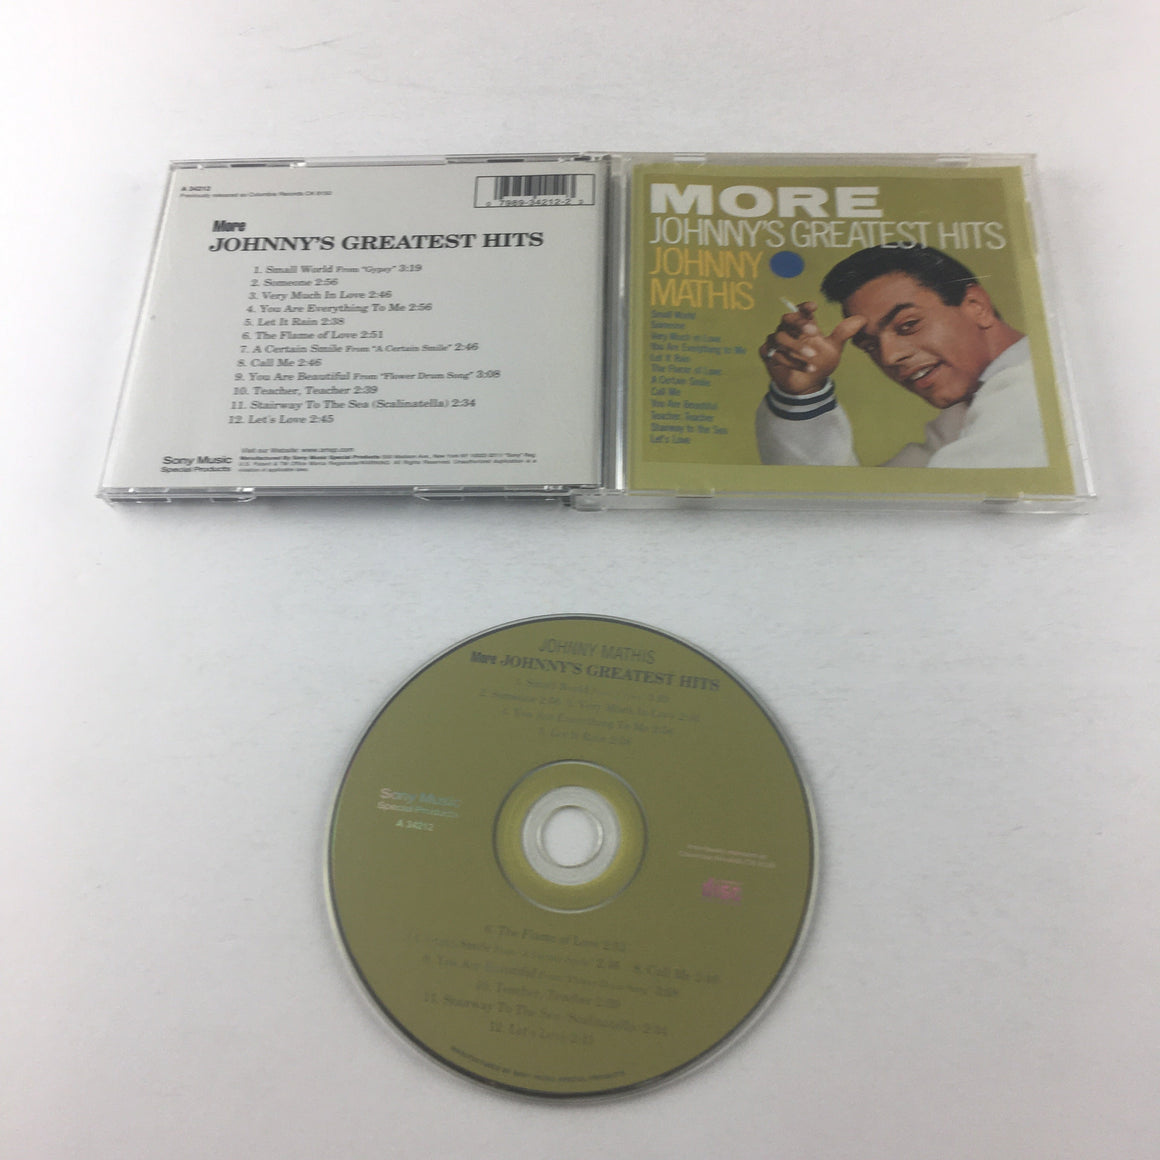 Johnny Mathis More Johnny's Greatest Hits Used CD VG\VG